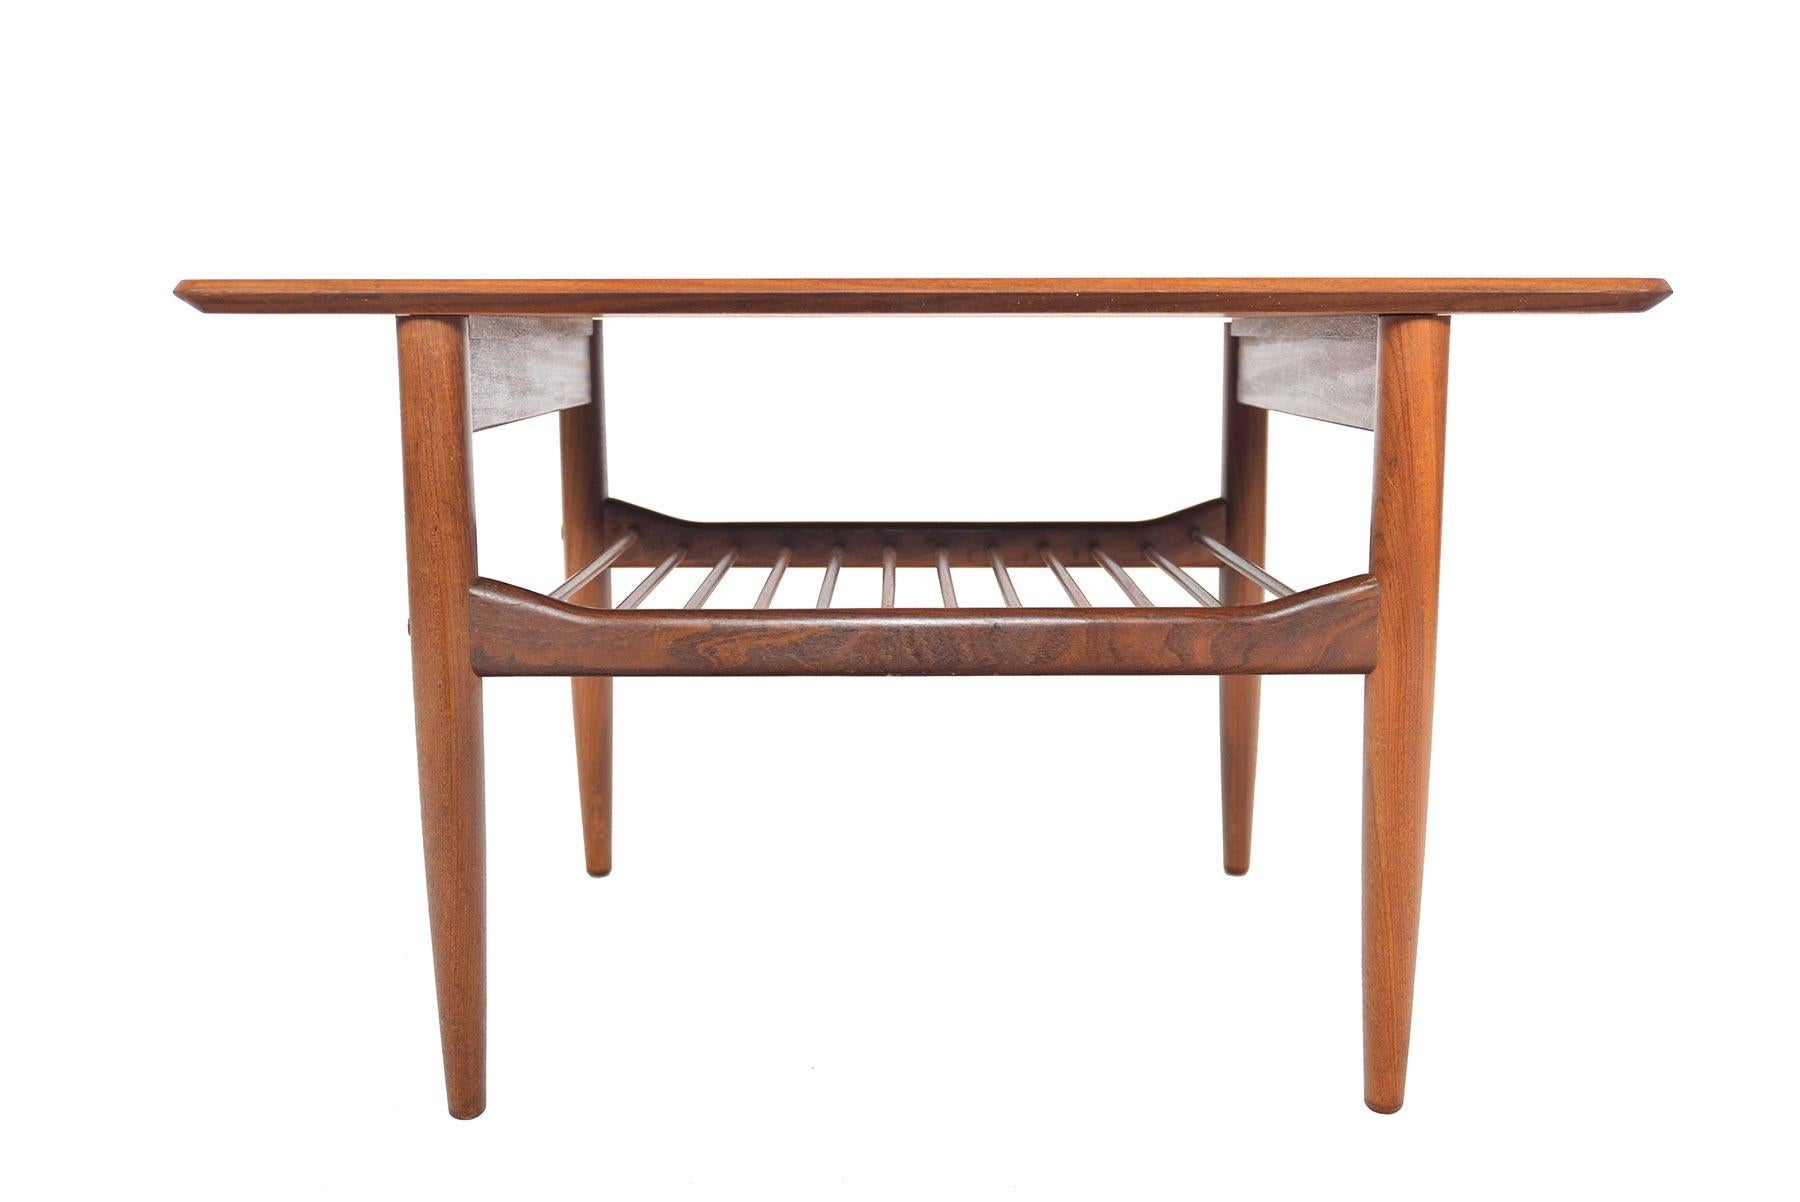 Designed by Ib Kofod-Larsen for G Plan’s Danish range in the 1960s, perfectly detailed side table is crafted in old- growth teak. A lower doweled rack provides storage. In excellent original condition.

 